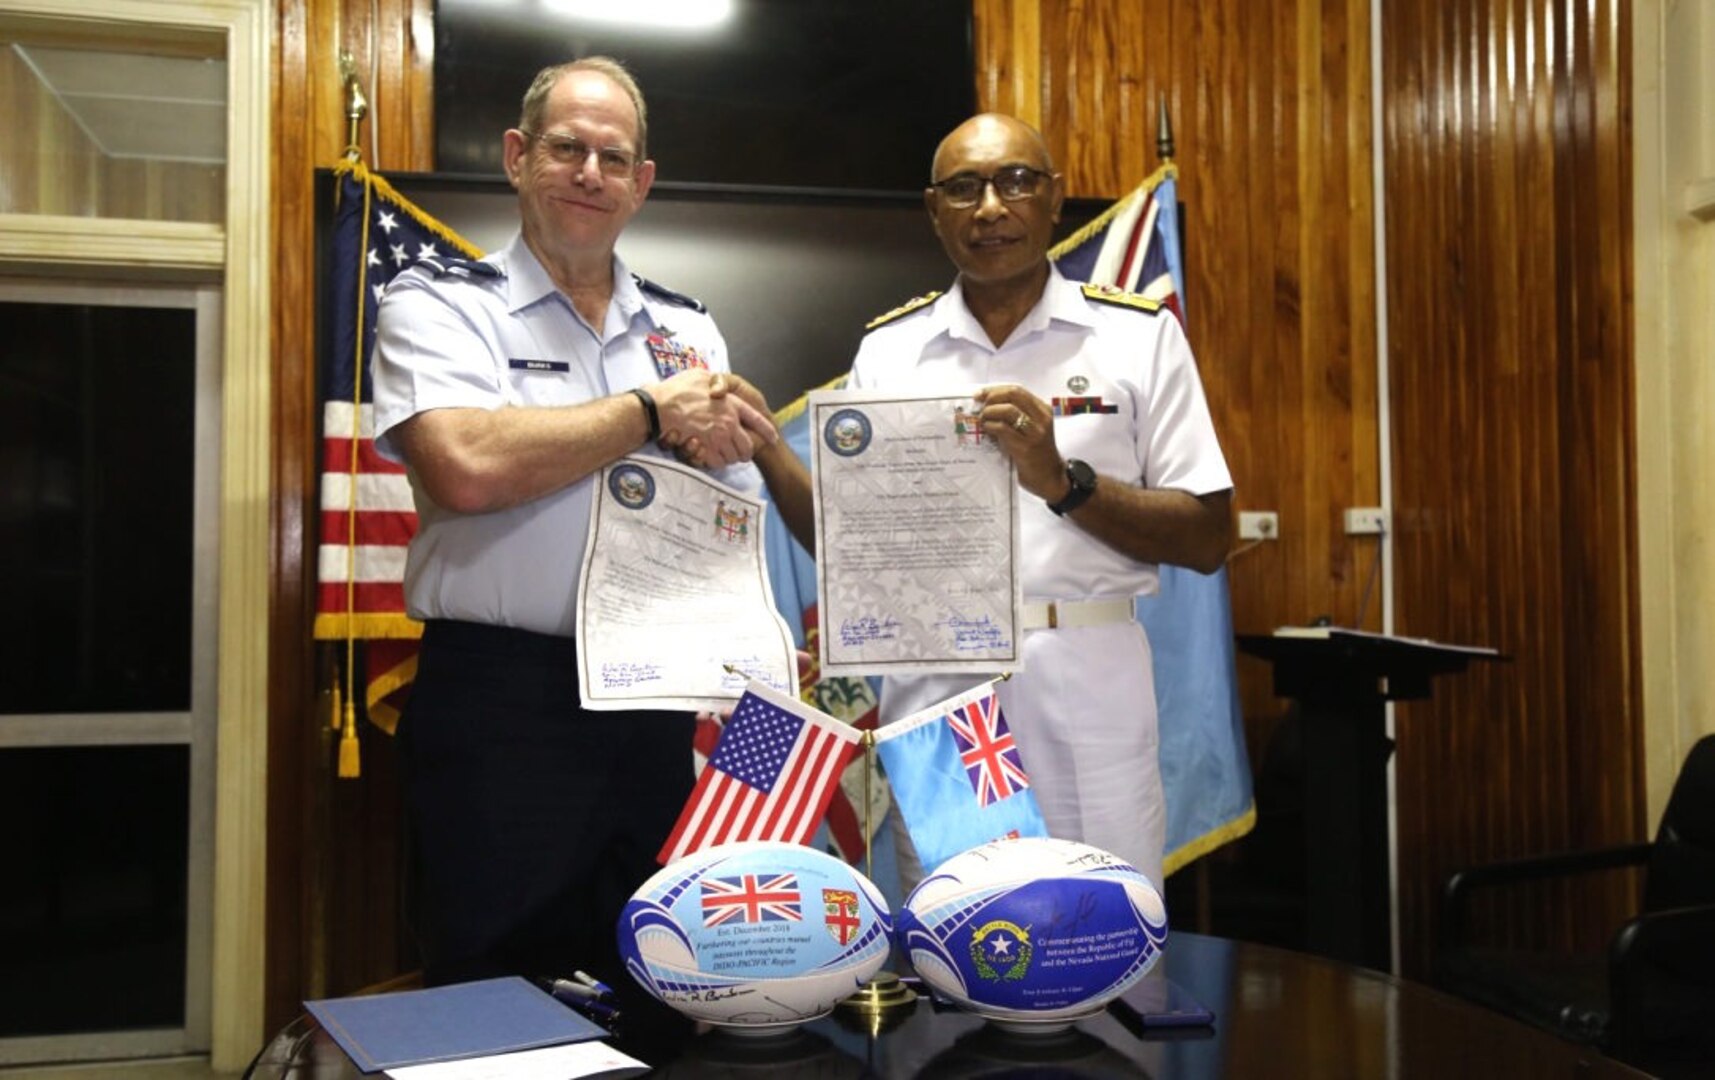 Brigadier General William R. Burks, Adjutant General for the State of Nevada (left) with Rear Admiral Viliame Naupoto, Commander of the Republic of Fiji Military Forces enter the island country into the State's Partnership Program.